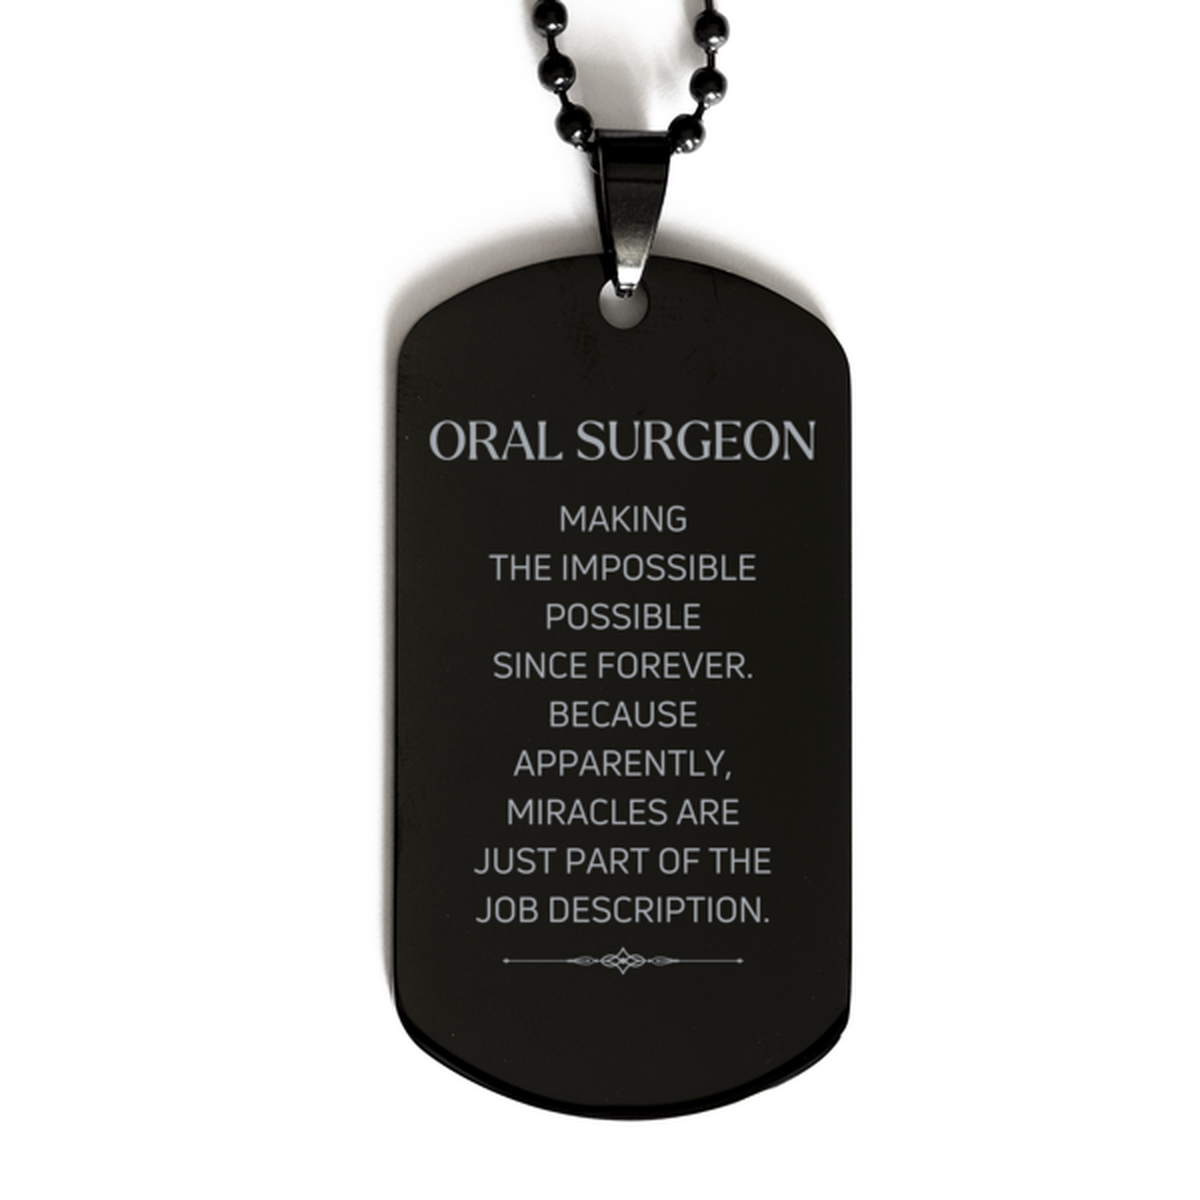 Funny Oral Surgeon Gifts, Miracles are just part of the job description, Inspirational Birthday Black Dog Tag For Oral Surgeon, Men, Women, Coworkers, Friends, Boss